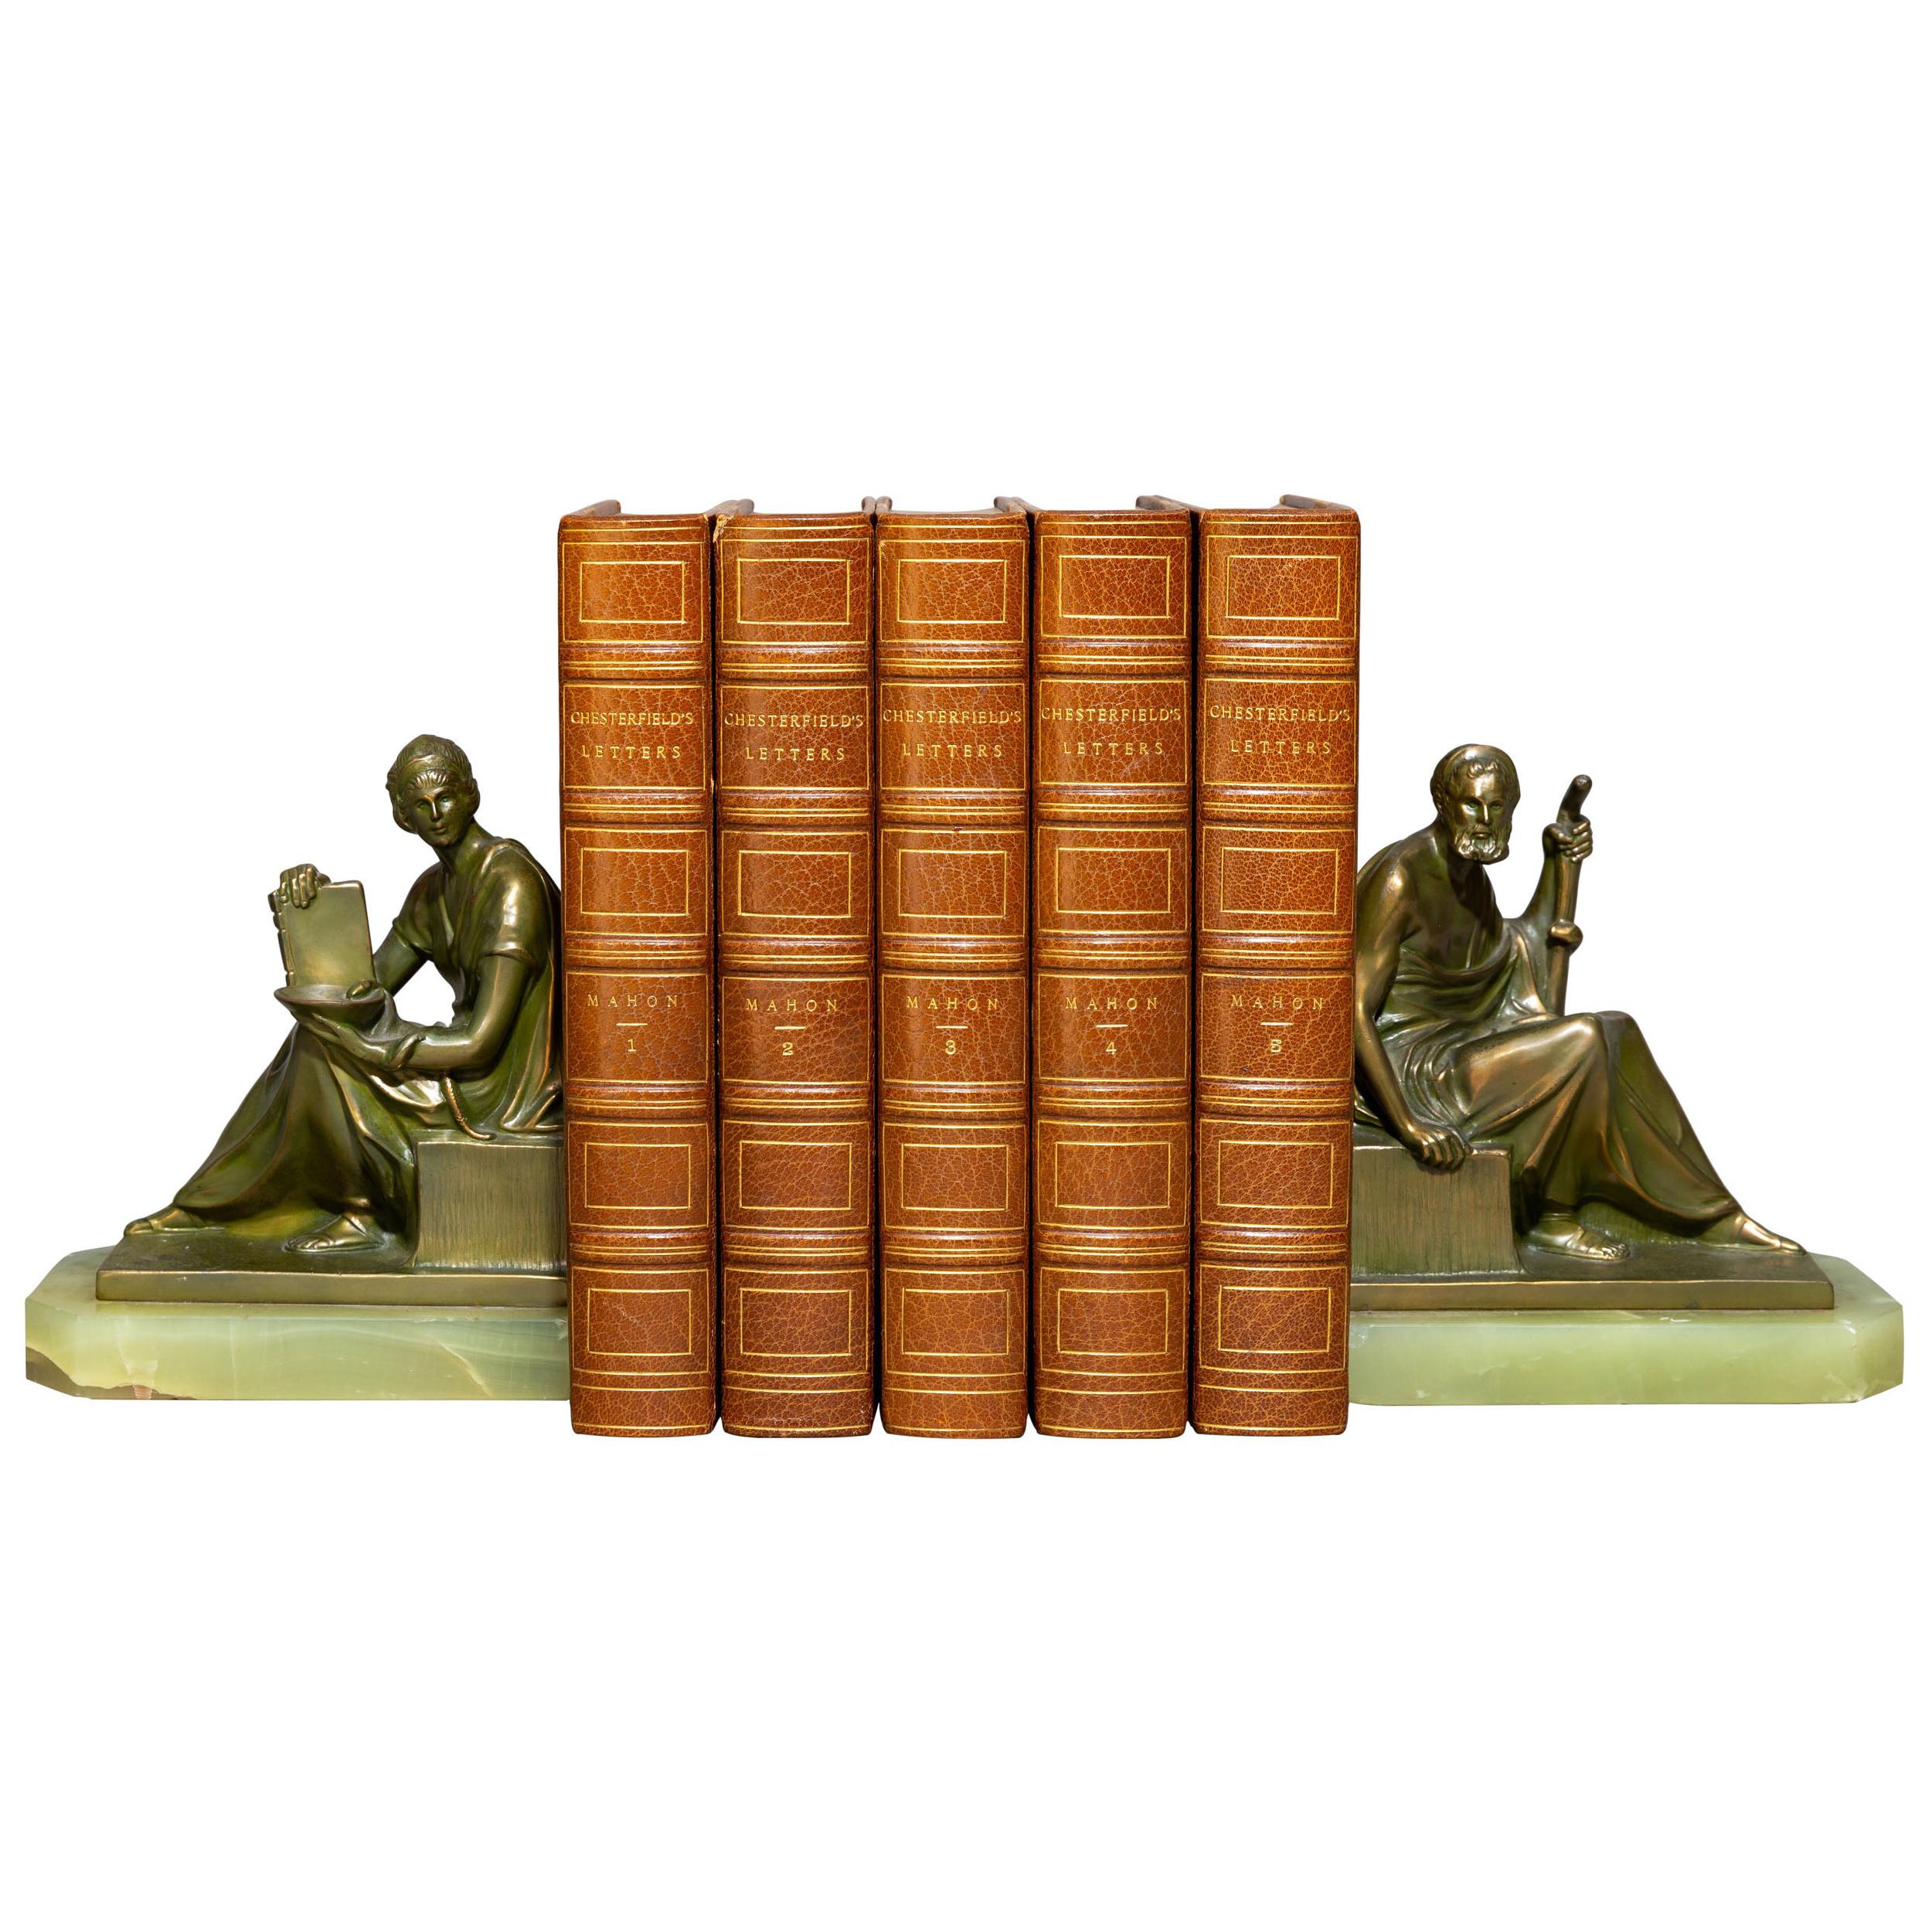 'Book Set', 5 Volumes, Lord Chesterfield, Lettters